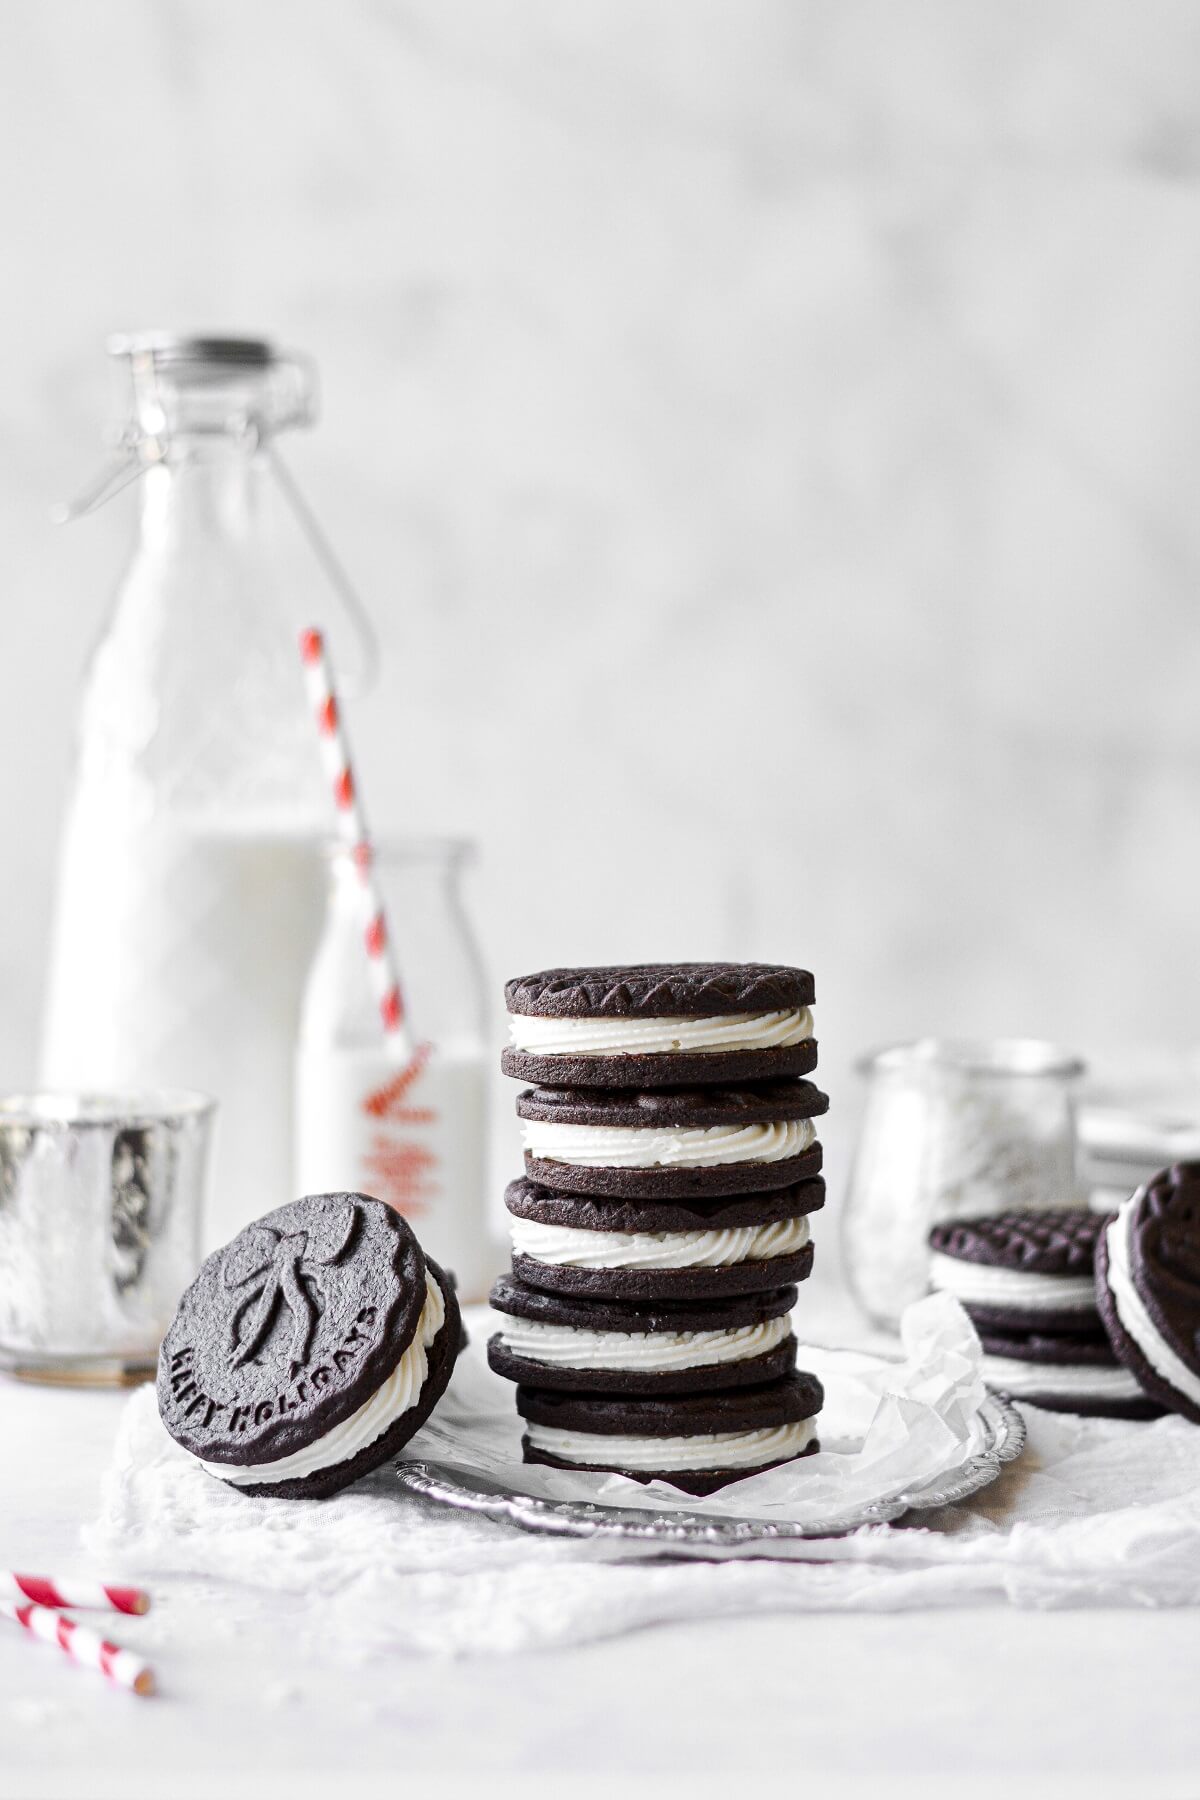 Chocolate sandwich cookies filled with coconut cream frosting.